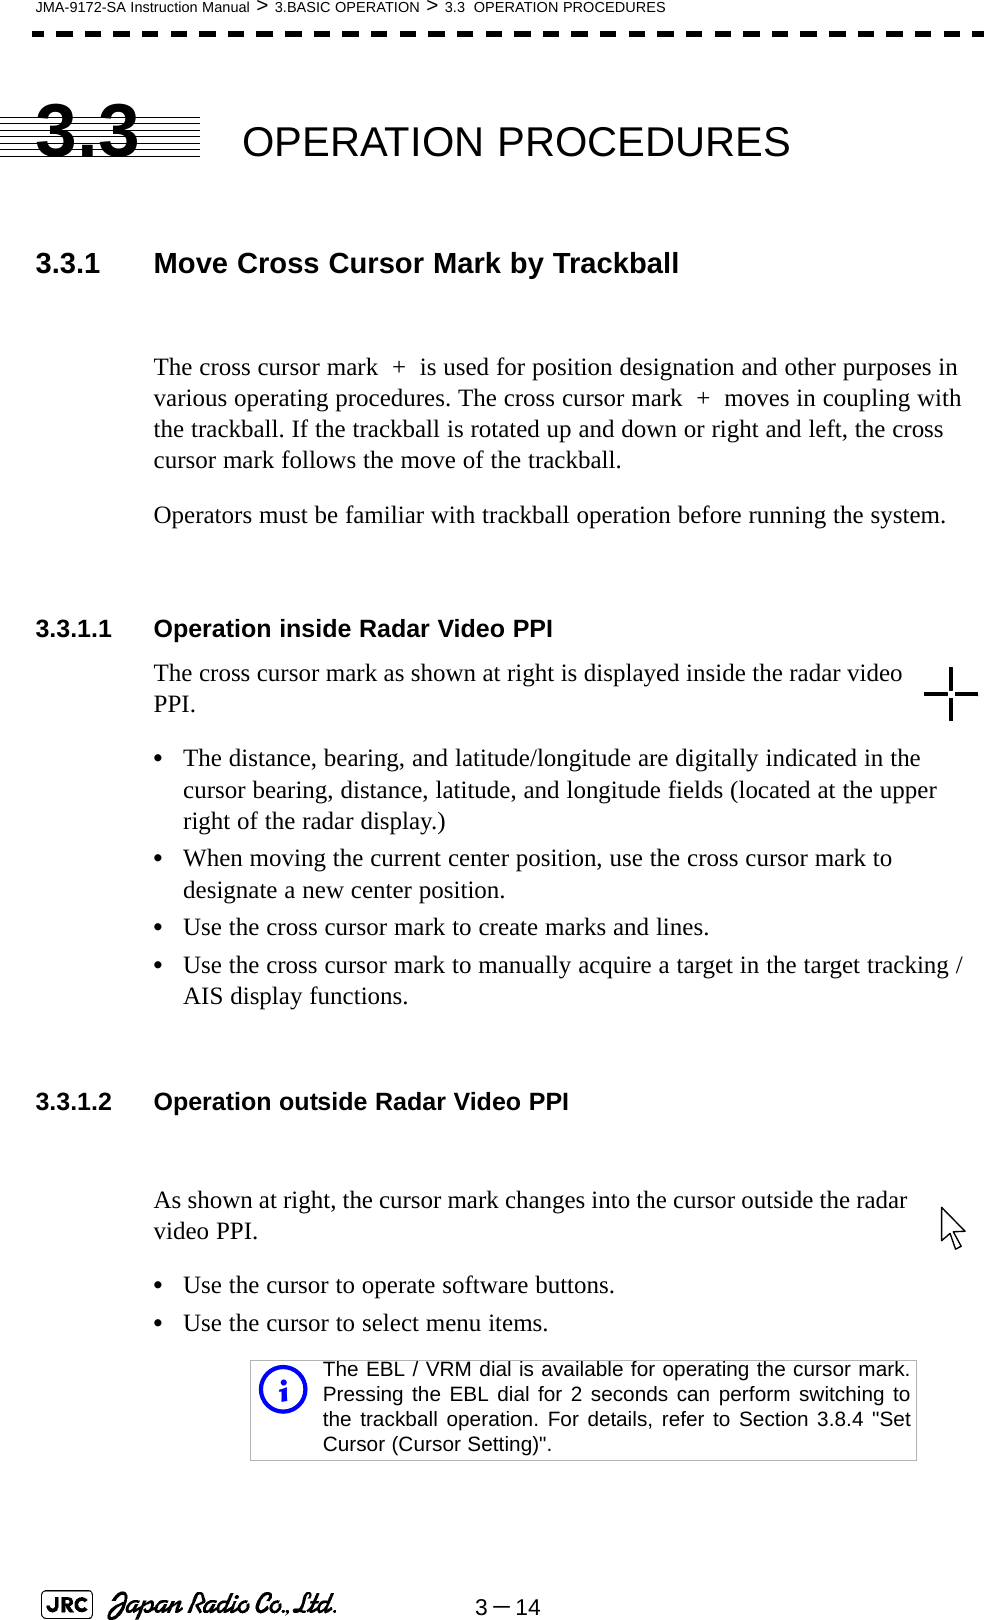 3－14JMA-9172-SA Instruction Manual &gt; 3.BASIC OPERATION &gt; 3.3  OPERATION PROCEDURES3.3 OPERATION PROCEDURES3.3.1 Move Cross Cursor Mark by TrackballThe cross cursor mark  +  is used for position designation and other purposes in various operating procedures. The cross cursor mark  +  moves in coupling with the trackball. If the trackball is rotated up and down or right and left, the cross cursor mark follows the move of the trackball.Operators must be familiar with trackball operation before running the system.3.3.1.1 Operation inside Radar Video PPIThe cross cursor mark as shown at right is displayed inside the radar video PPI.•The distance, bearing, and latitude/longitude are digitally indicated in the cursor bearing, distance, latitude, and longitude fields (located at the upper right of the radar display.)•When moving the current center position, use the cross cursor mark to designate a new center position.•Use the cross cursor mark to create marks and lines.•Use the cross cursor mark to manually acquire a target in the target tracking /AIS display functions.3.3.1.2 Operation outside Radar Video PPIAs shown at right, the cursor mark changes into the cursor outside the radar video PPI.•Use the cursor to operate software buttons.•Use the cursor to select menu items.iThe EBL / VRM dial is available for operating the cursor mark.Pressing the EBL dial for 2 seconds can perform switching tothe trackball operation. For details, refer to Section 3.8.4 &quot;SetCursor (Cursor Setting)&quot;.